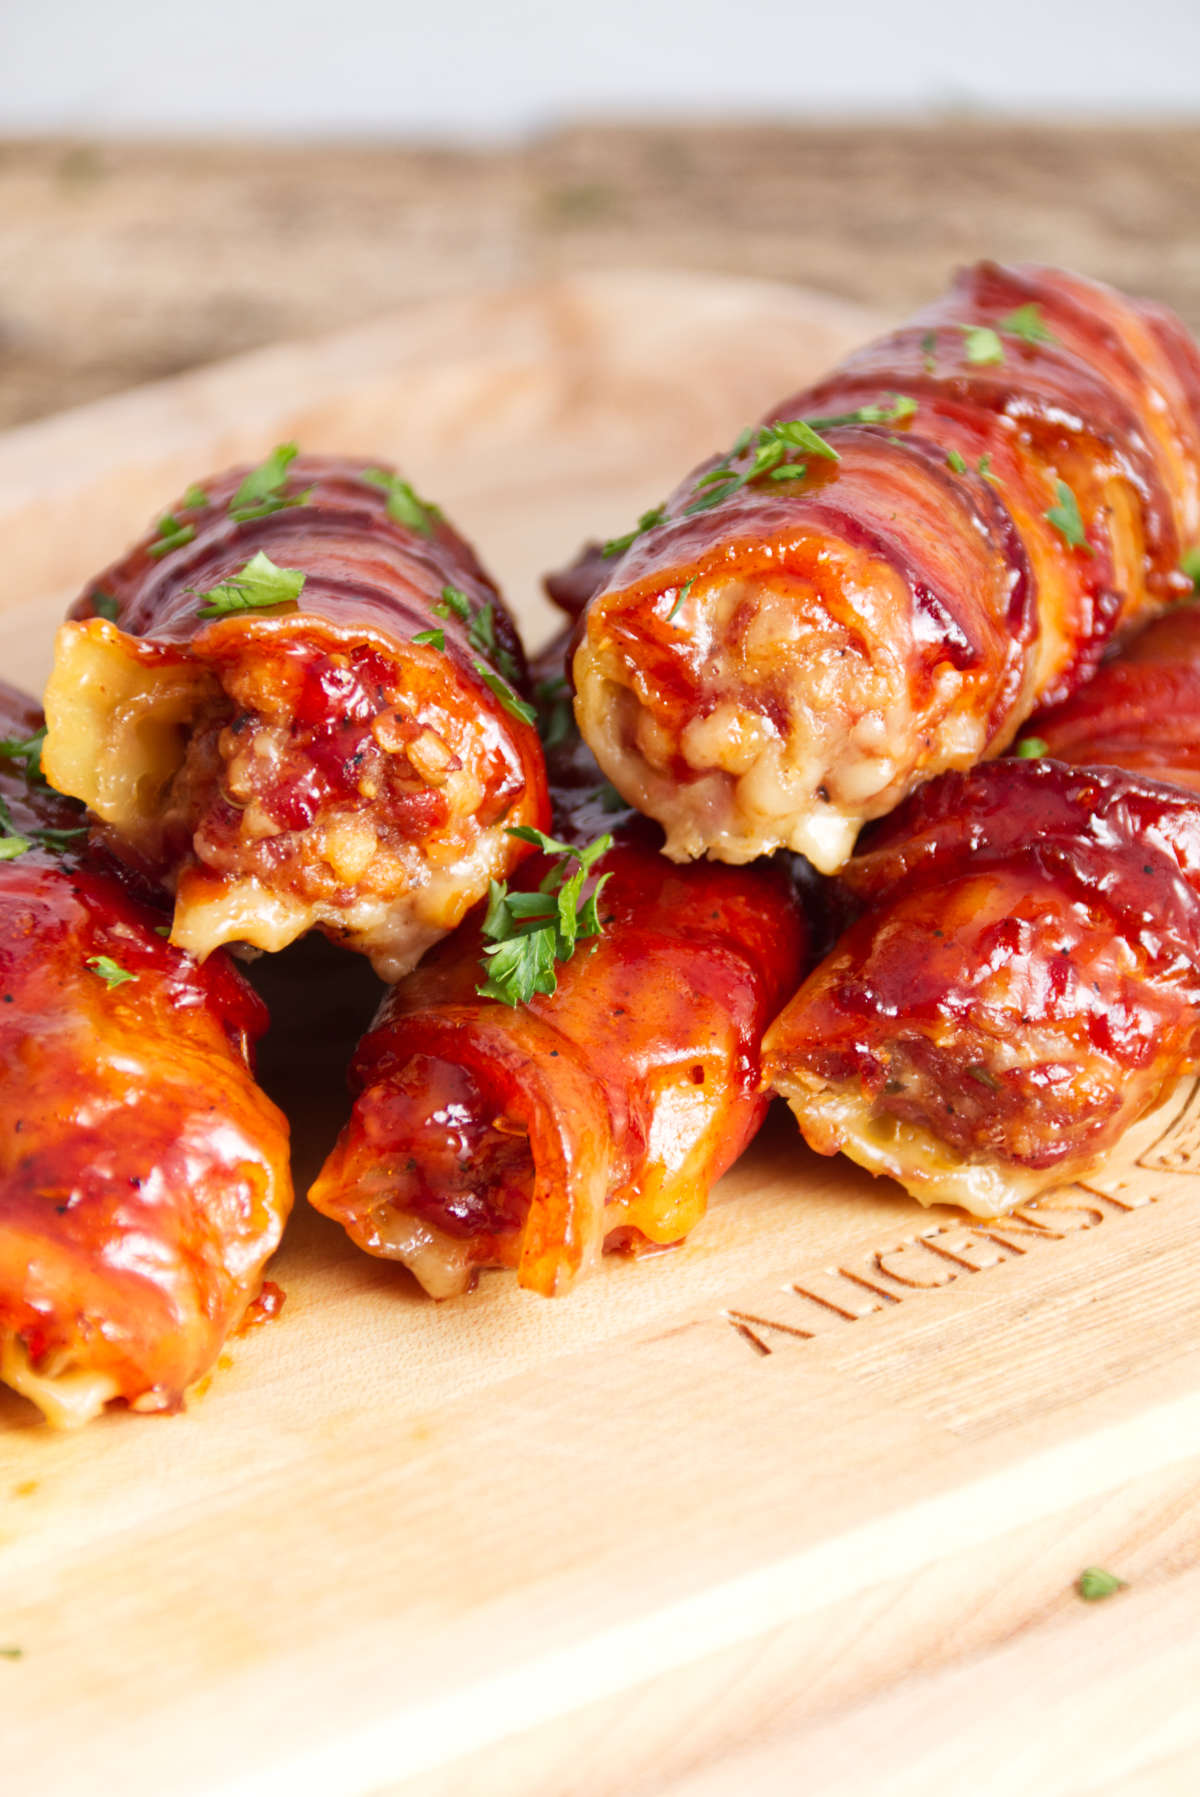 manicotti shells stuffed with sausage and wrapped in bacon and bbq sauce